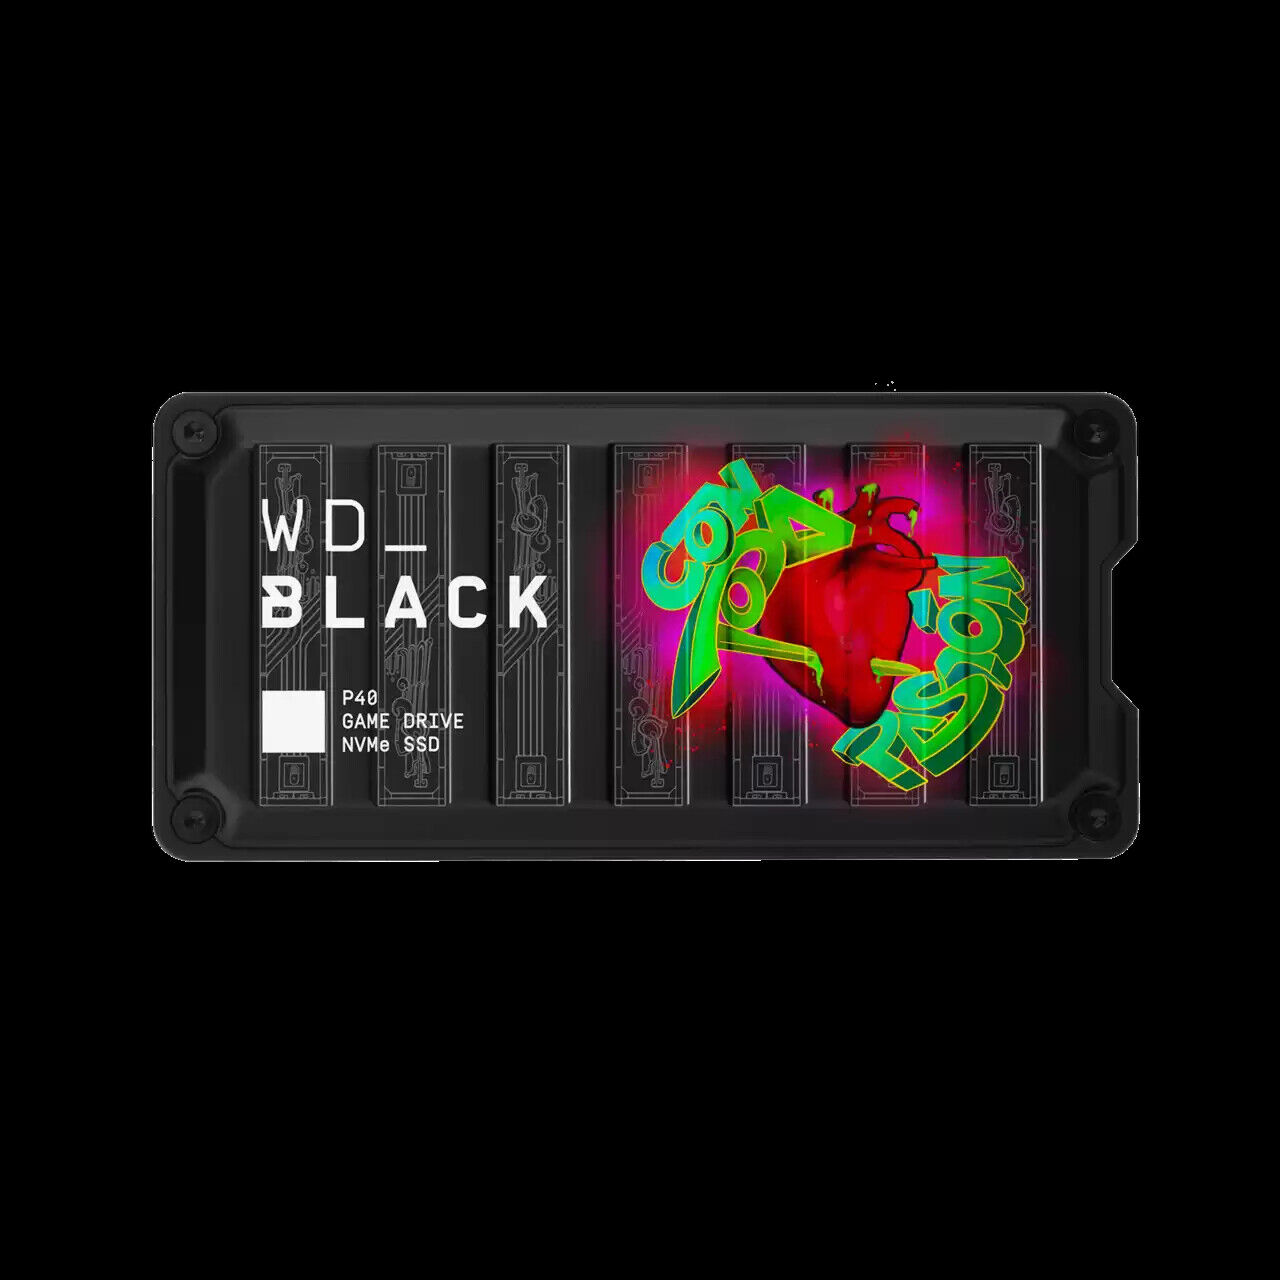 WD_BLACK 1TB P40 Game Drive SSD External Solid State Drive - WDBAWY0010BM1-WESN